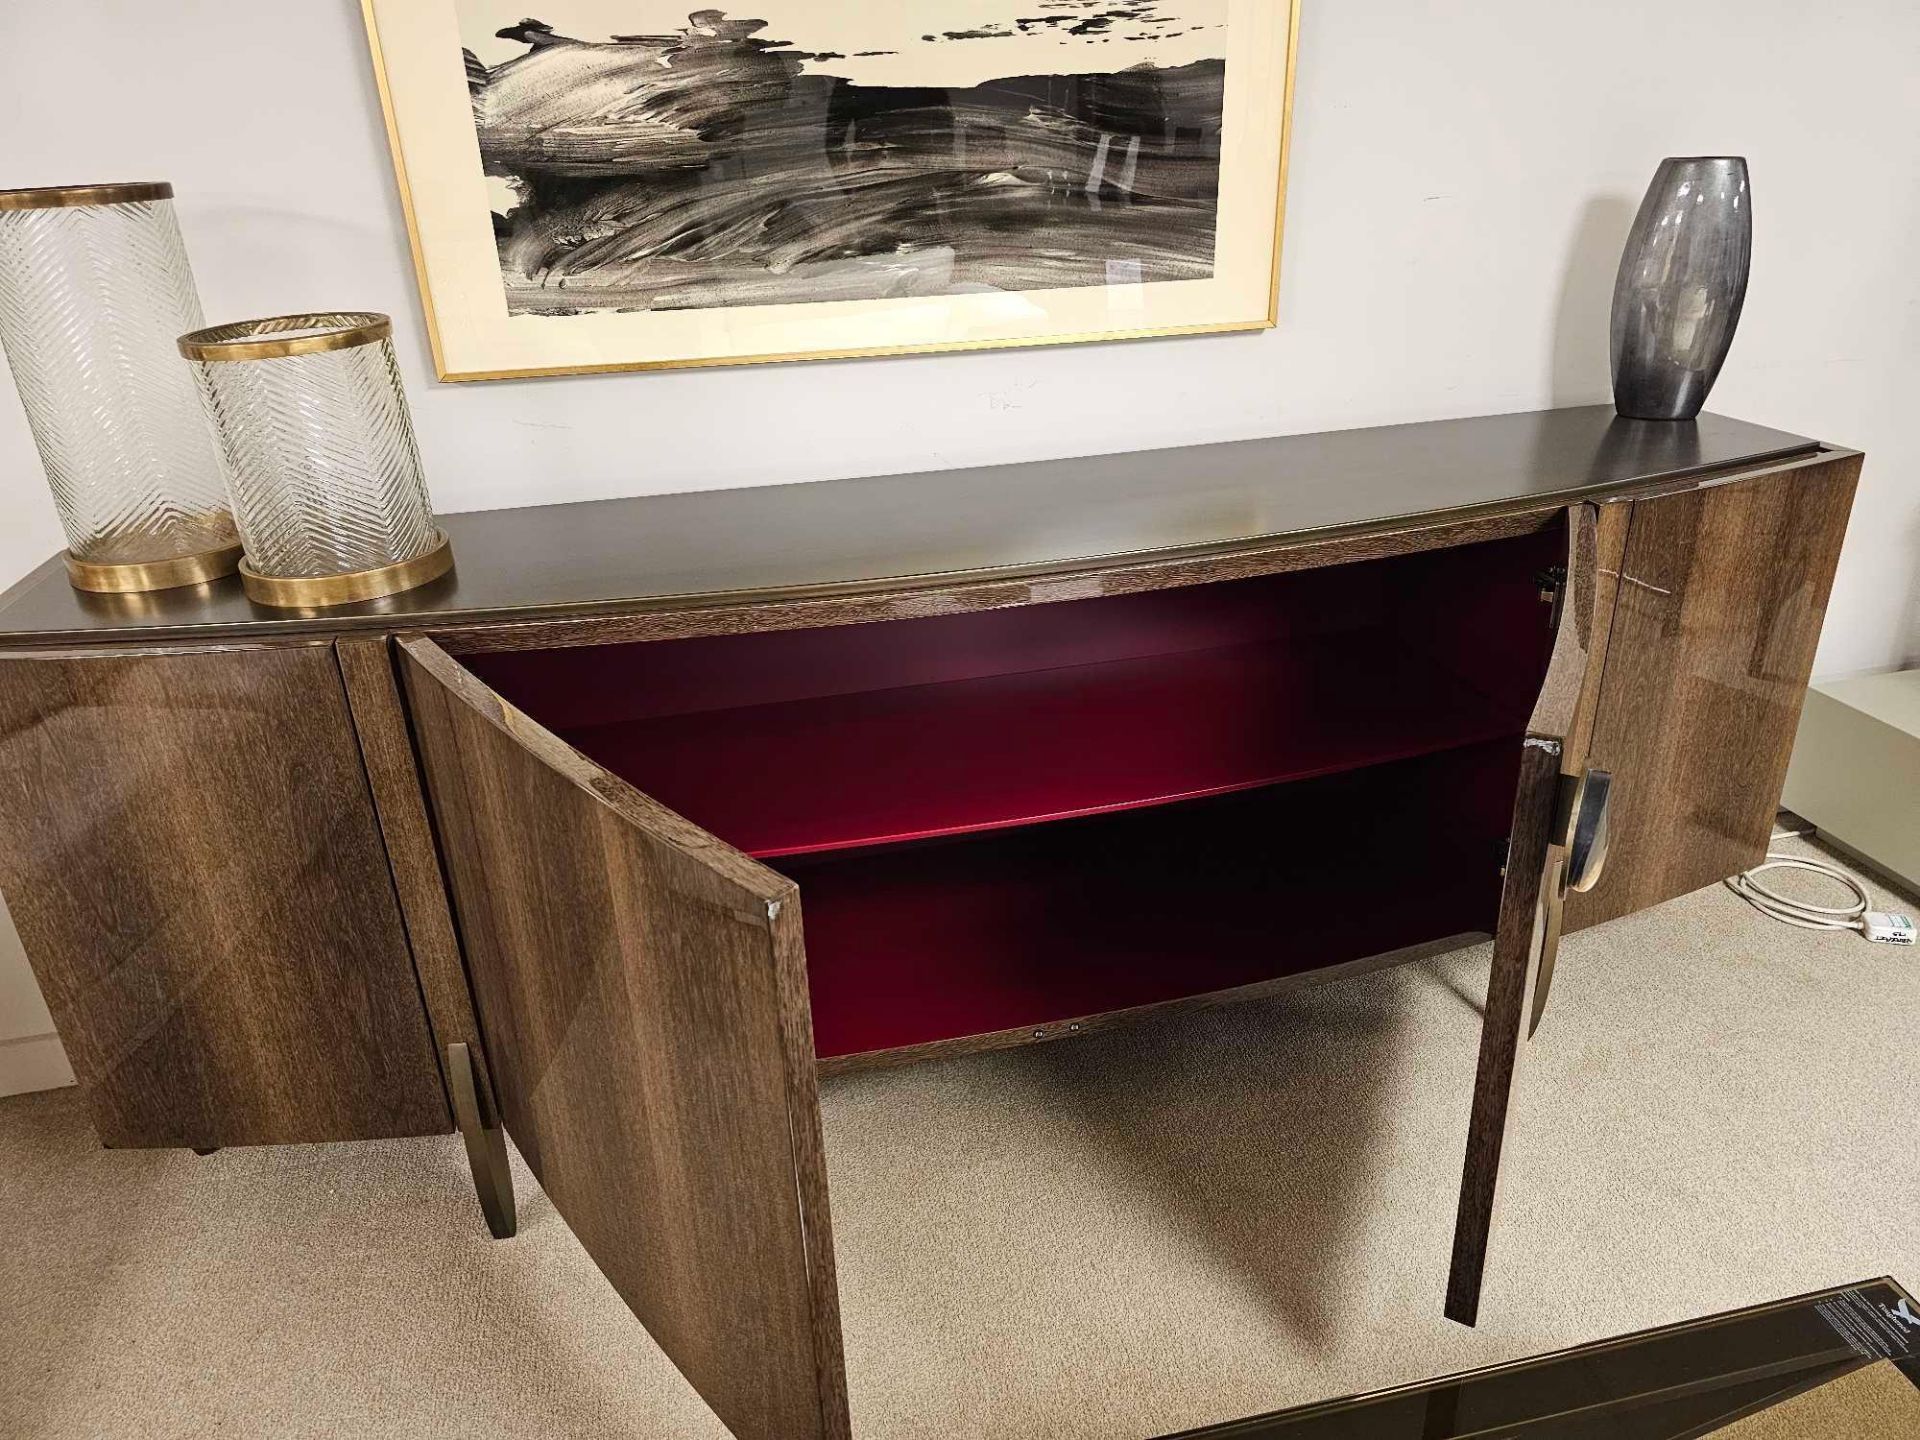 Fashion Affair Large Sideboard by Telemaco for Malerba The Buffet, for the living room, is shaped by - Image 24 of 25